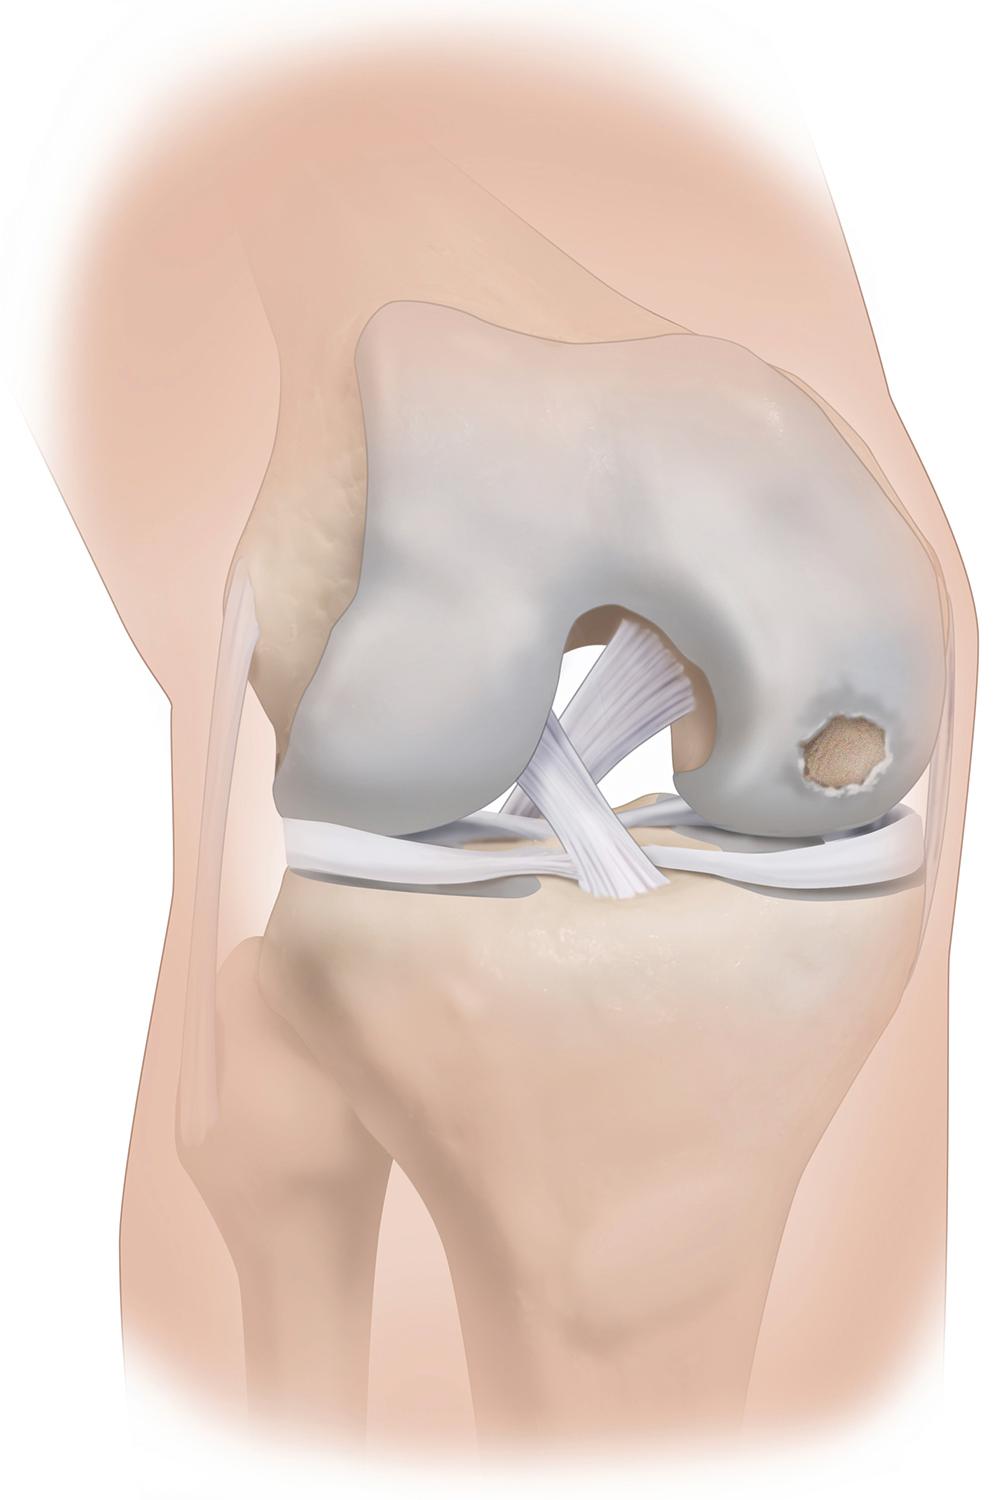 Fig. 22.1, Illustration representing a focal chondral defect on the femoral medial epicondyle.